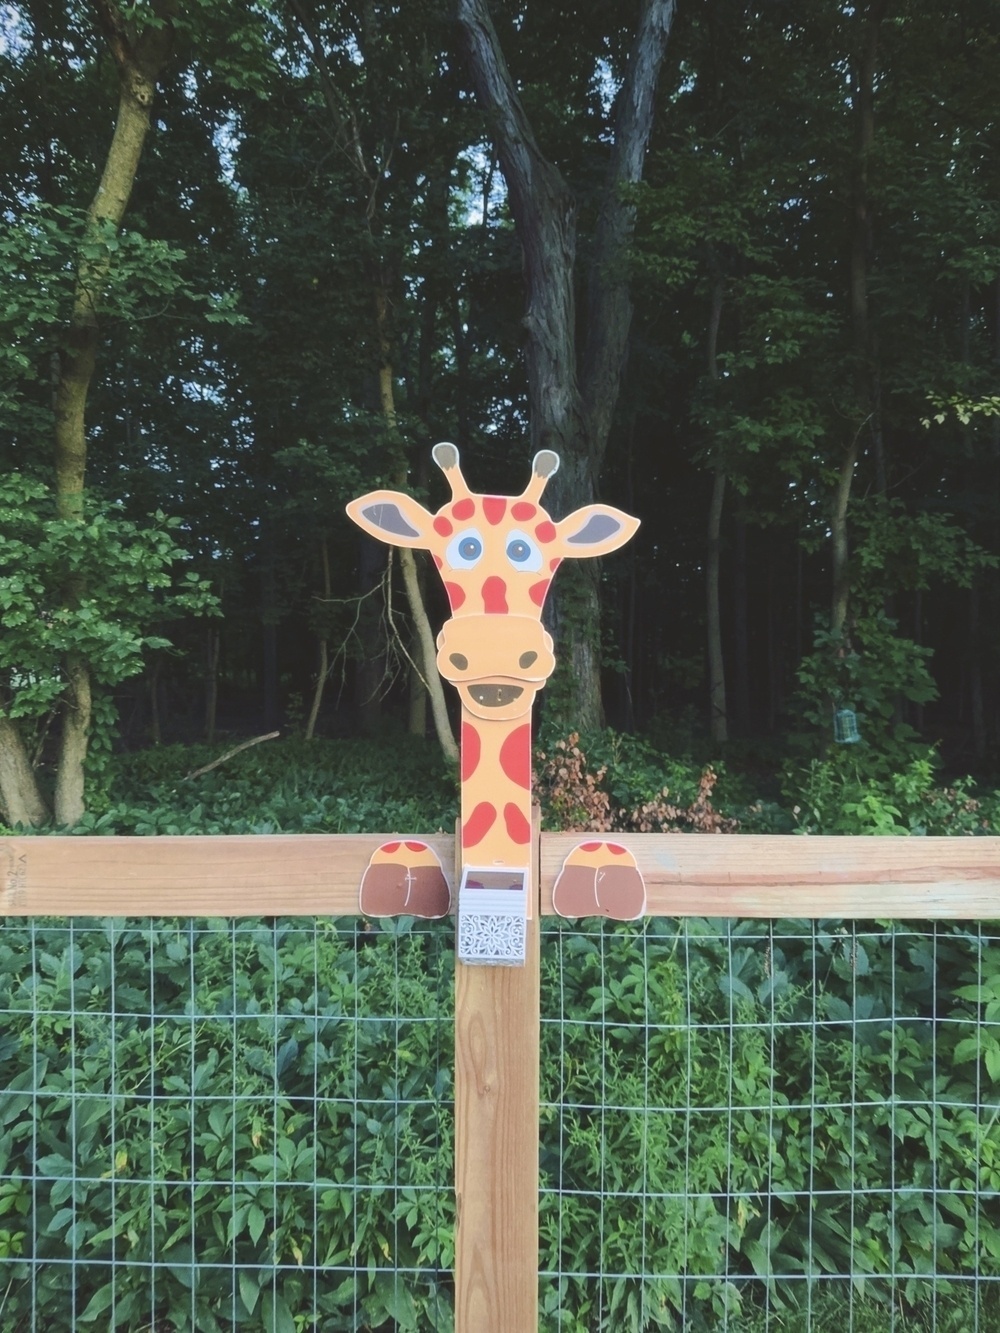 giraffe decoration attached to a chicken-cage fence in front of a dark wooden background